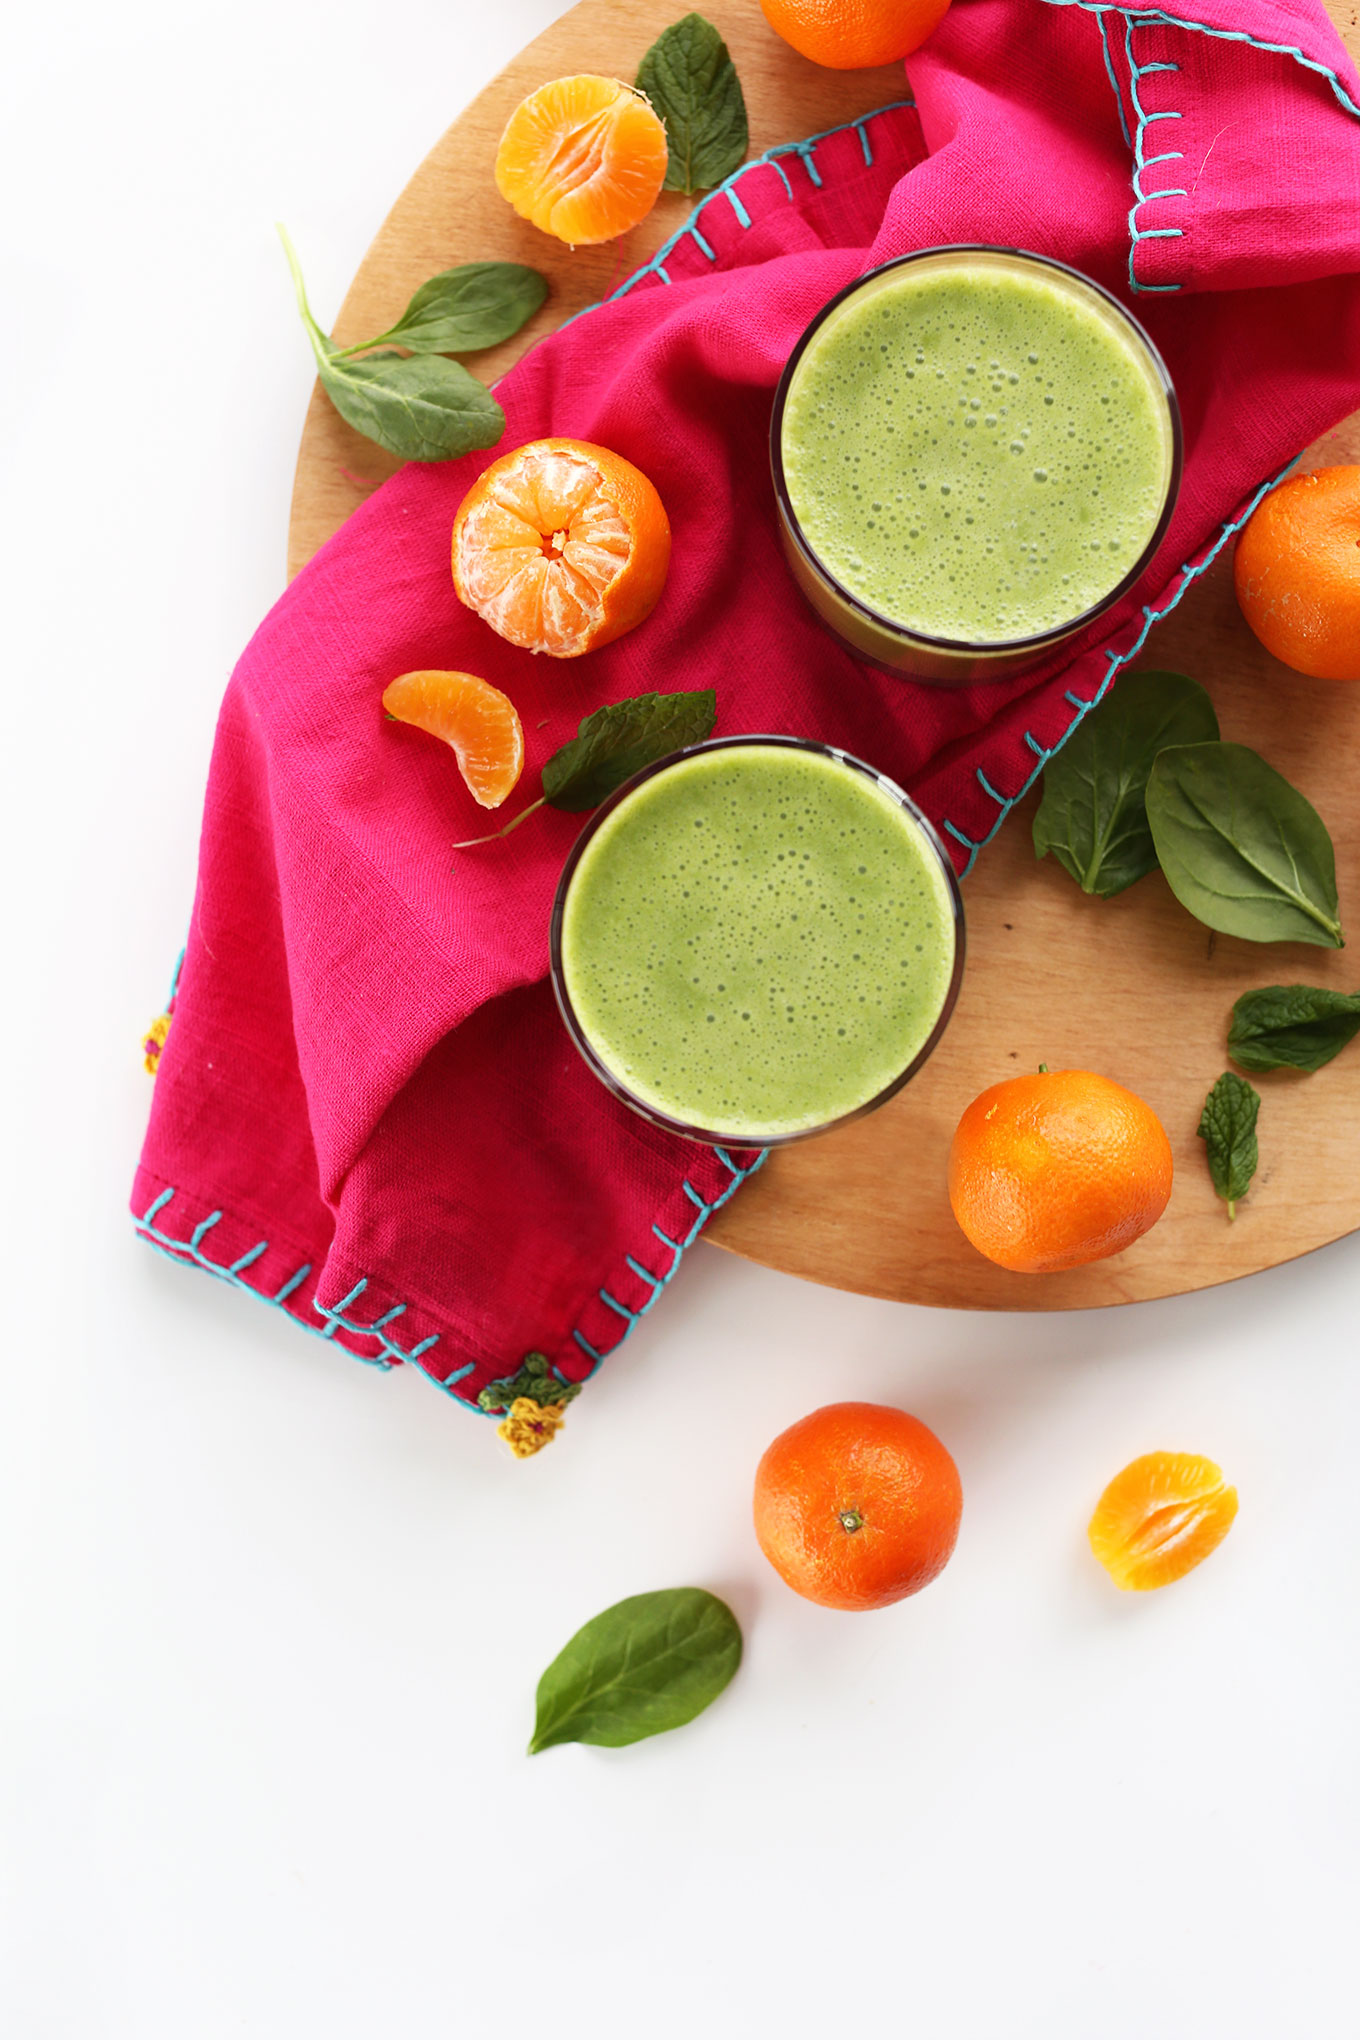 Glasses of our vegan green smoothie made with clementine, coconut, and spinach